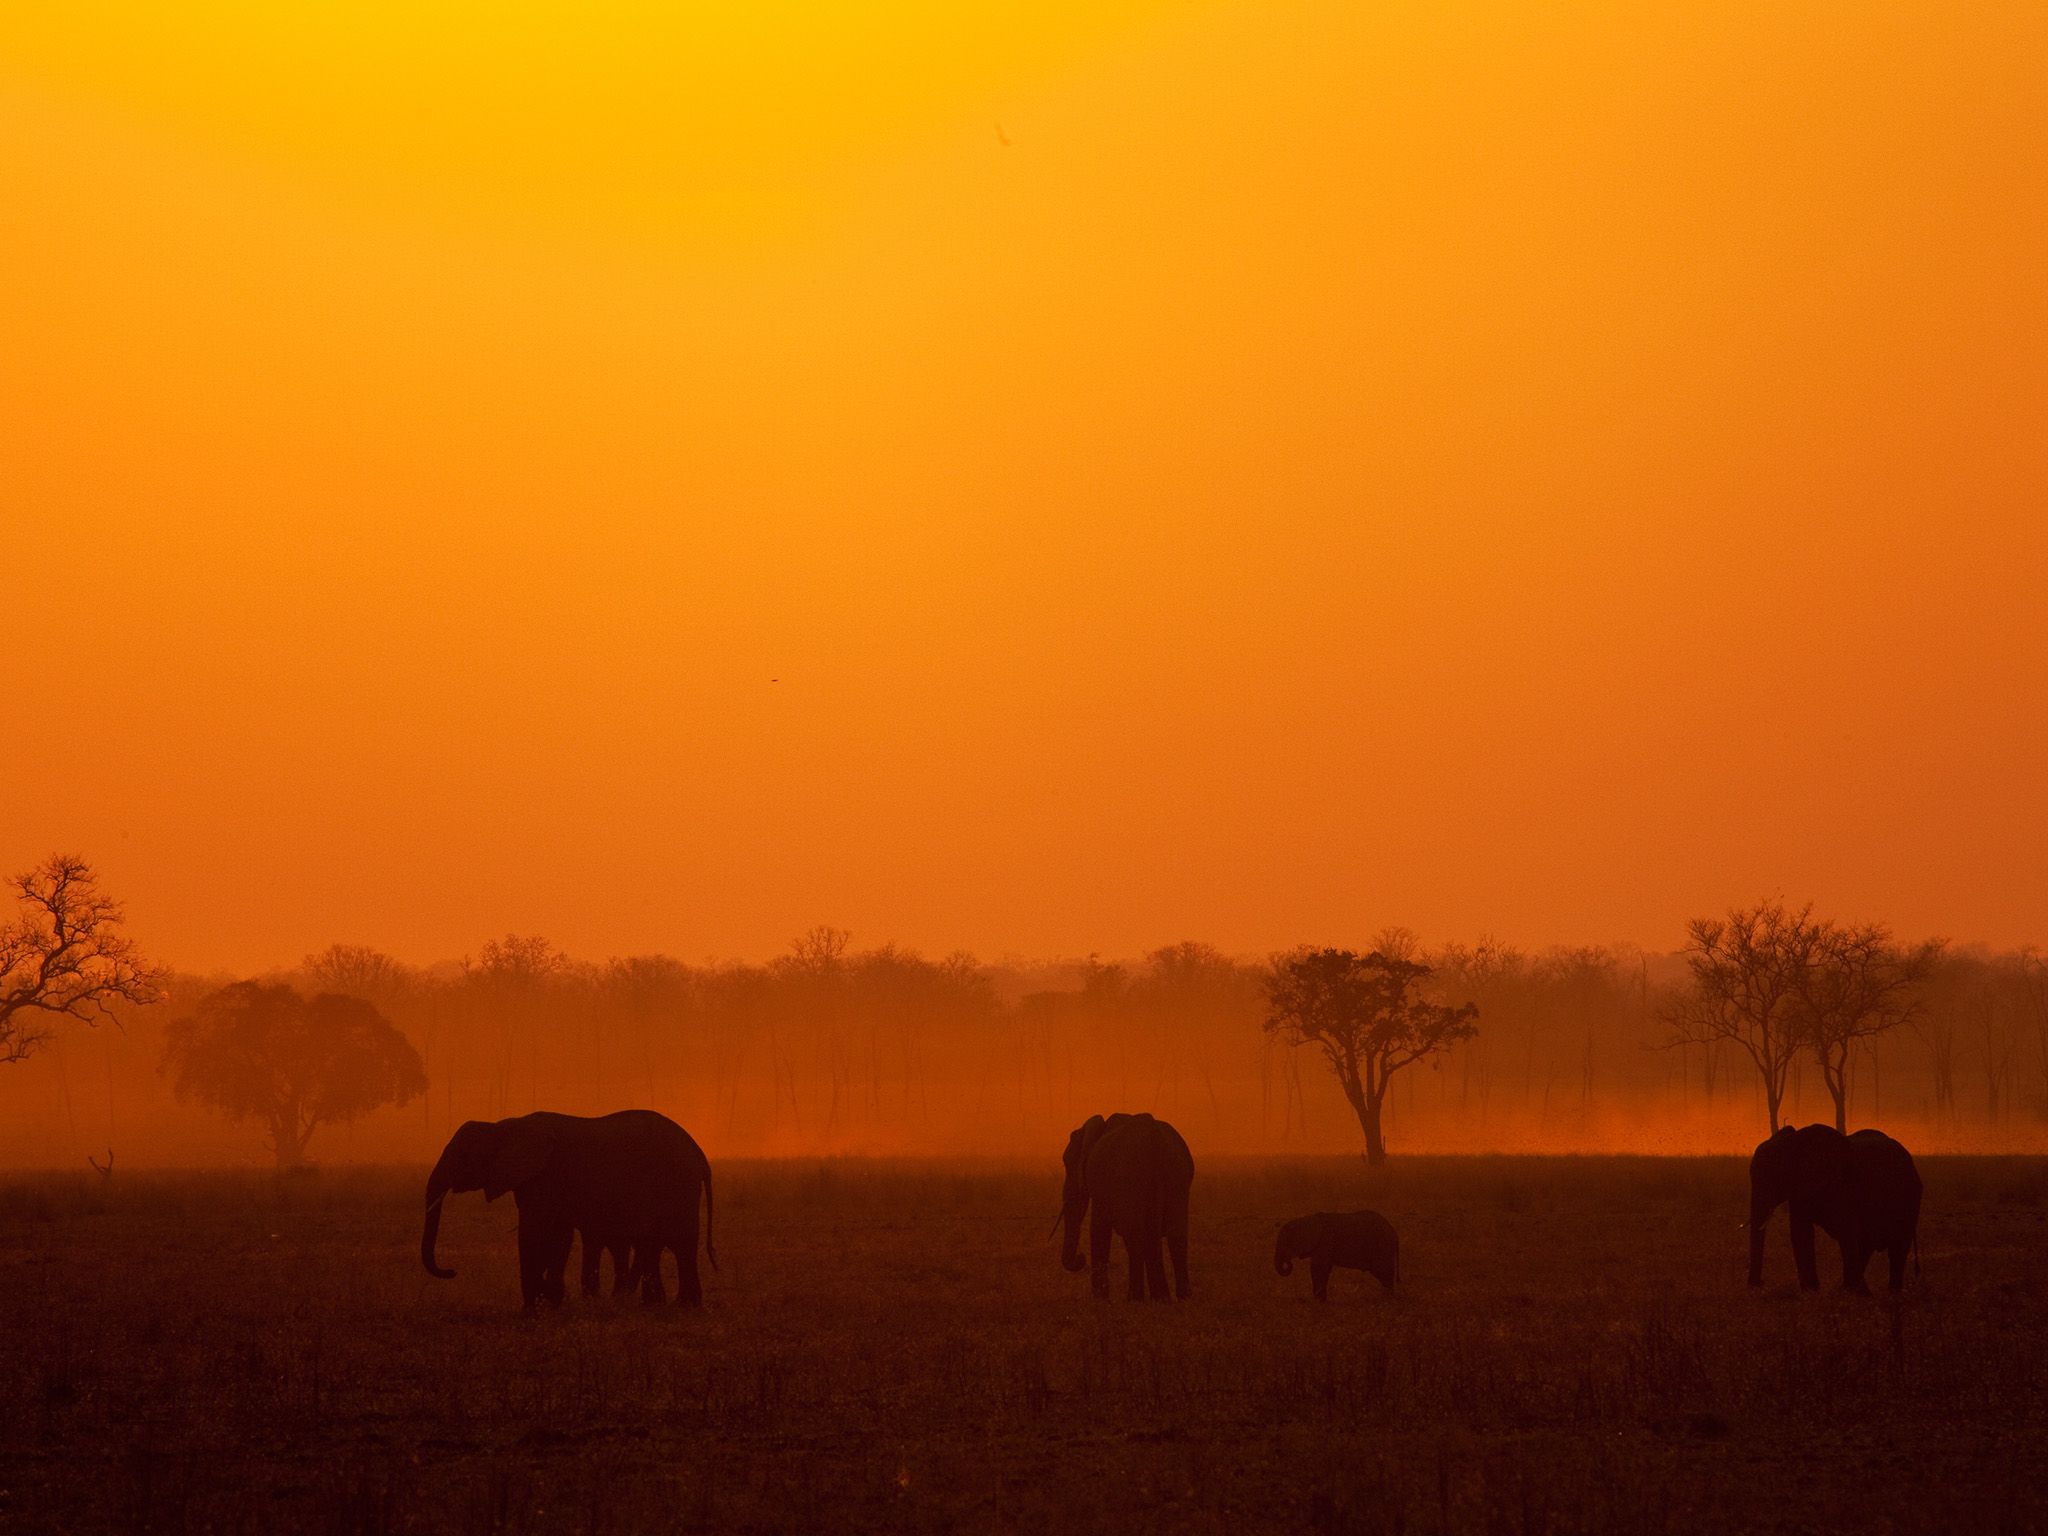 Elephant herd silhouette in sunset (landscape). Elephant herds tend to head for water during the... [Photo of the day - October 2014]